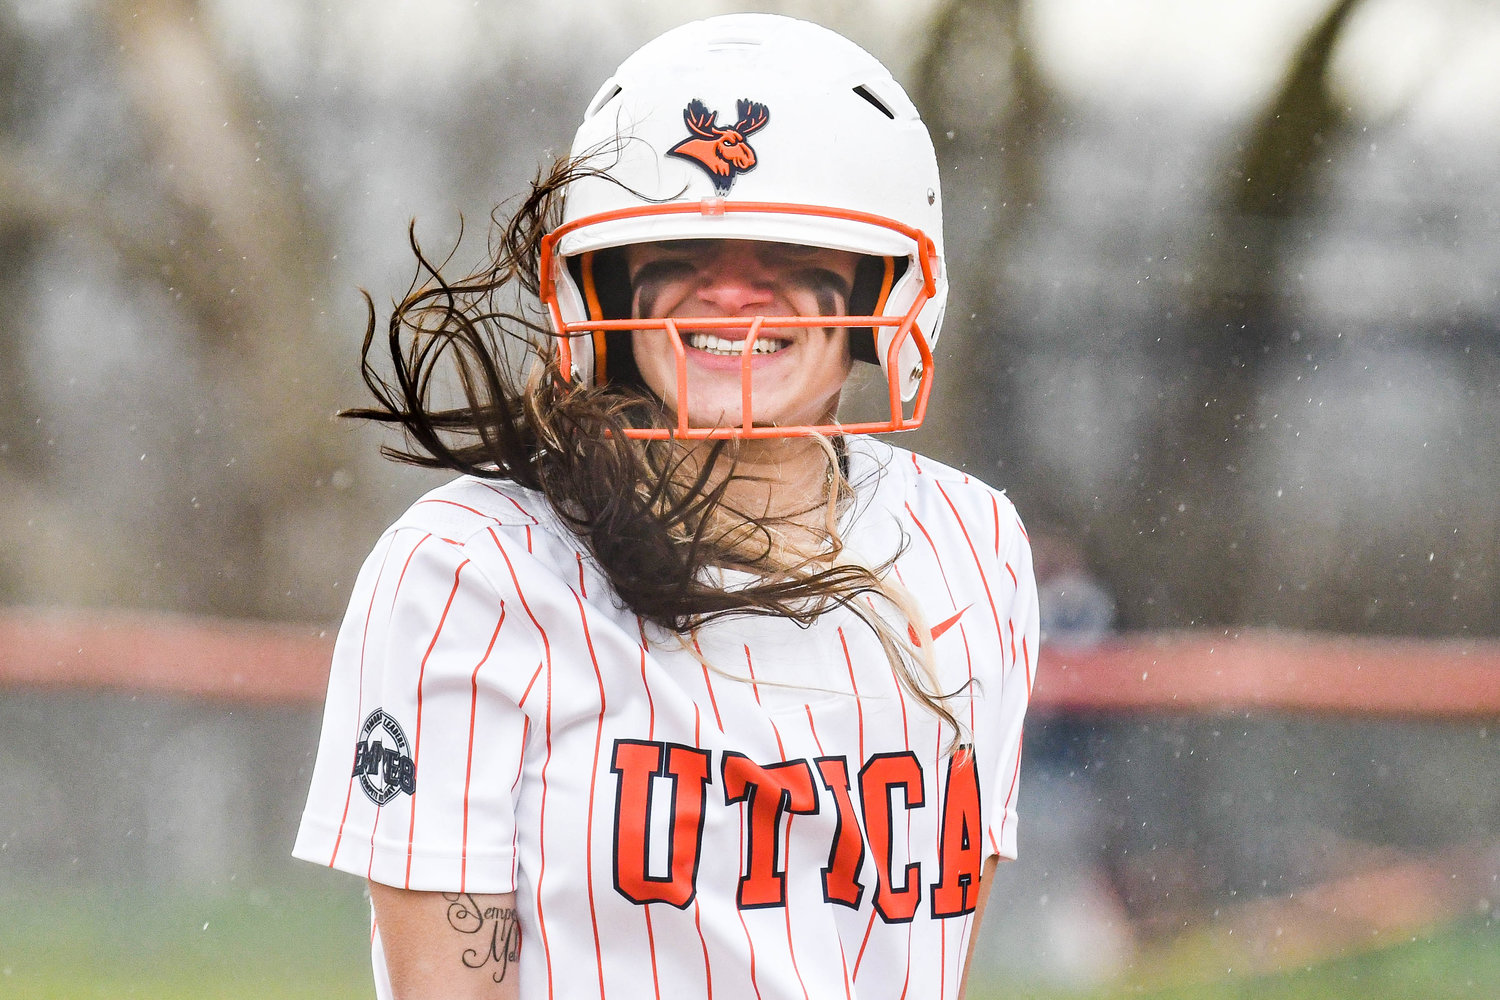 WINDY DAY — Utica University player Abriana Wadley smiles while standing in strong winds and rain during game two of a doubleheader against Russell Sage. The Pioneers split the twin bill, losing 2-1 in game one and winning 12-7 in game two.